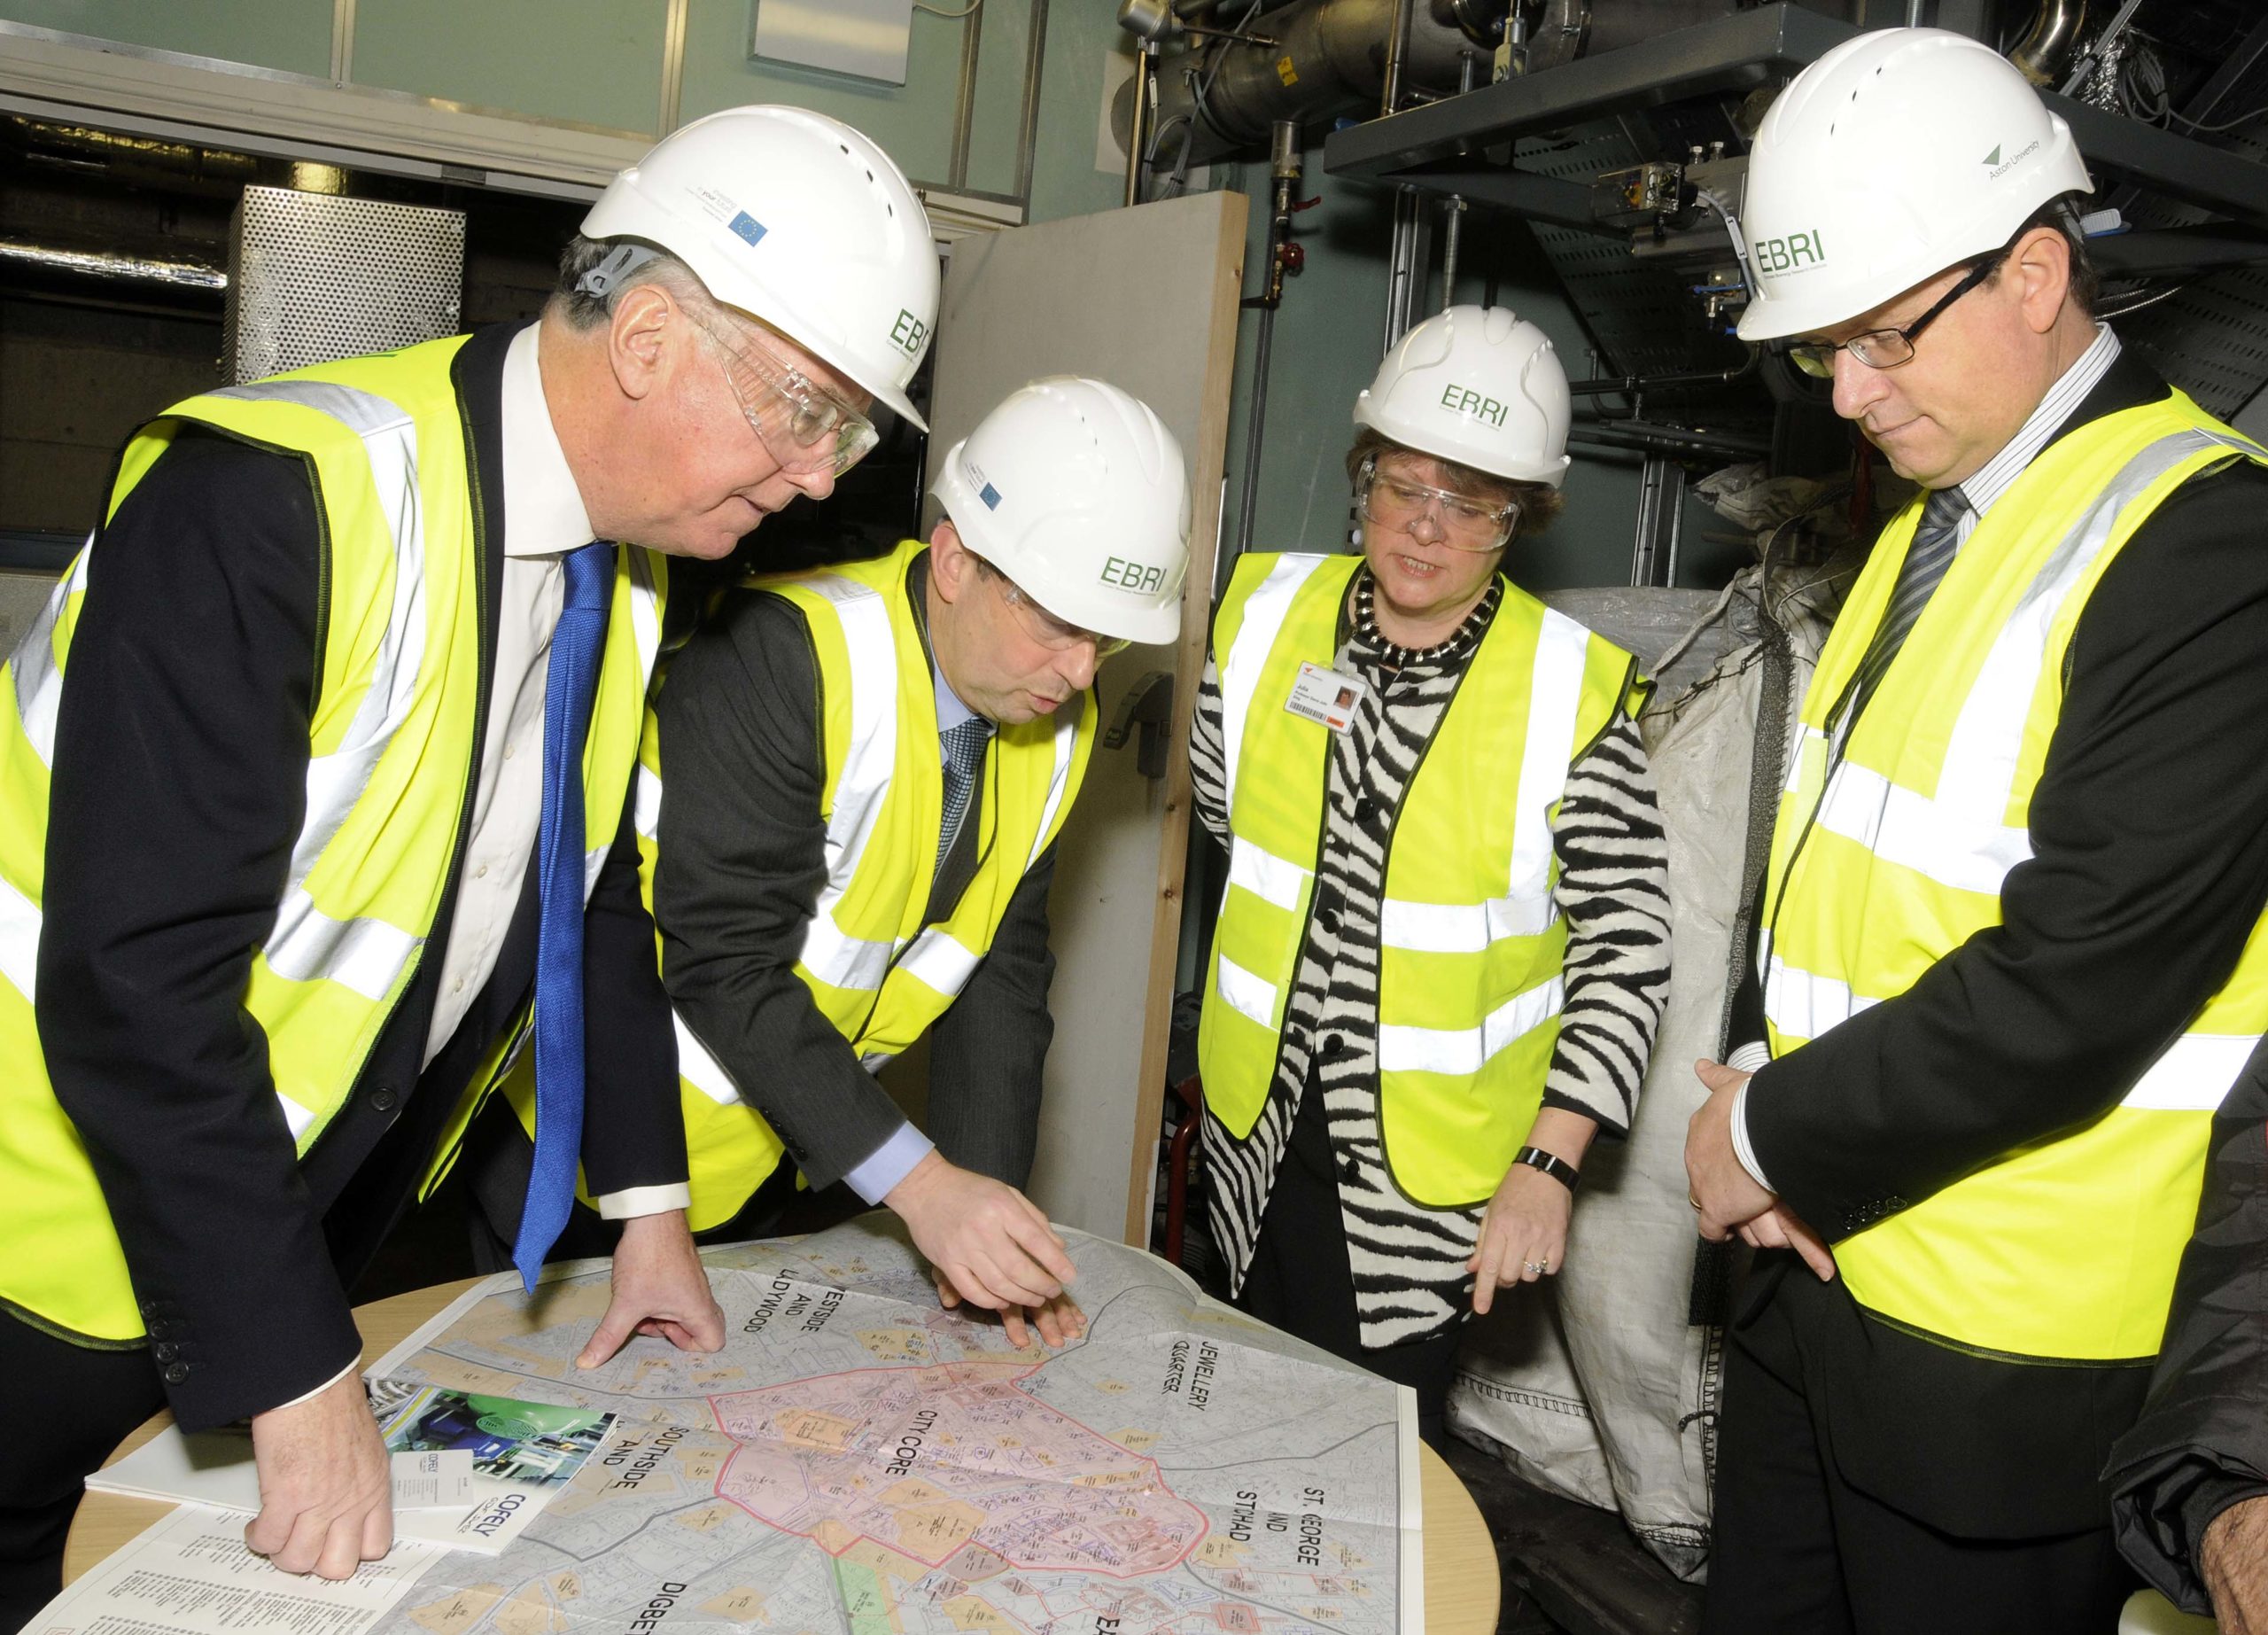 Business Minister learns of bioenergy opportunities in the West Midlands from EBRI experts